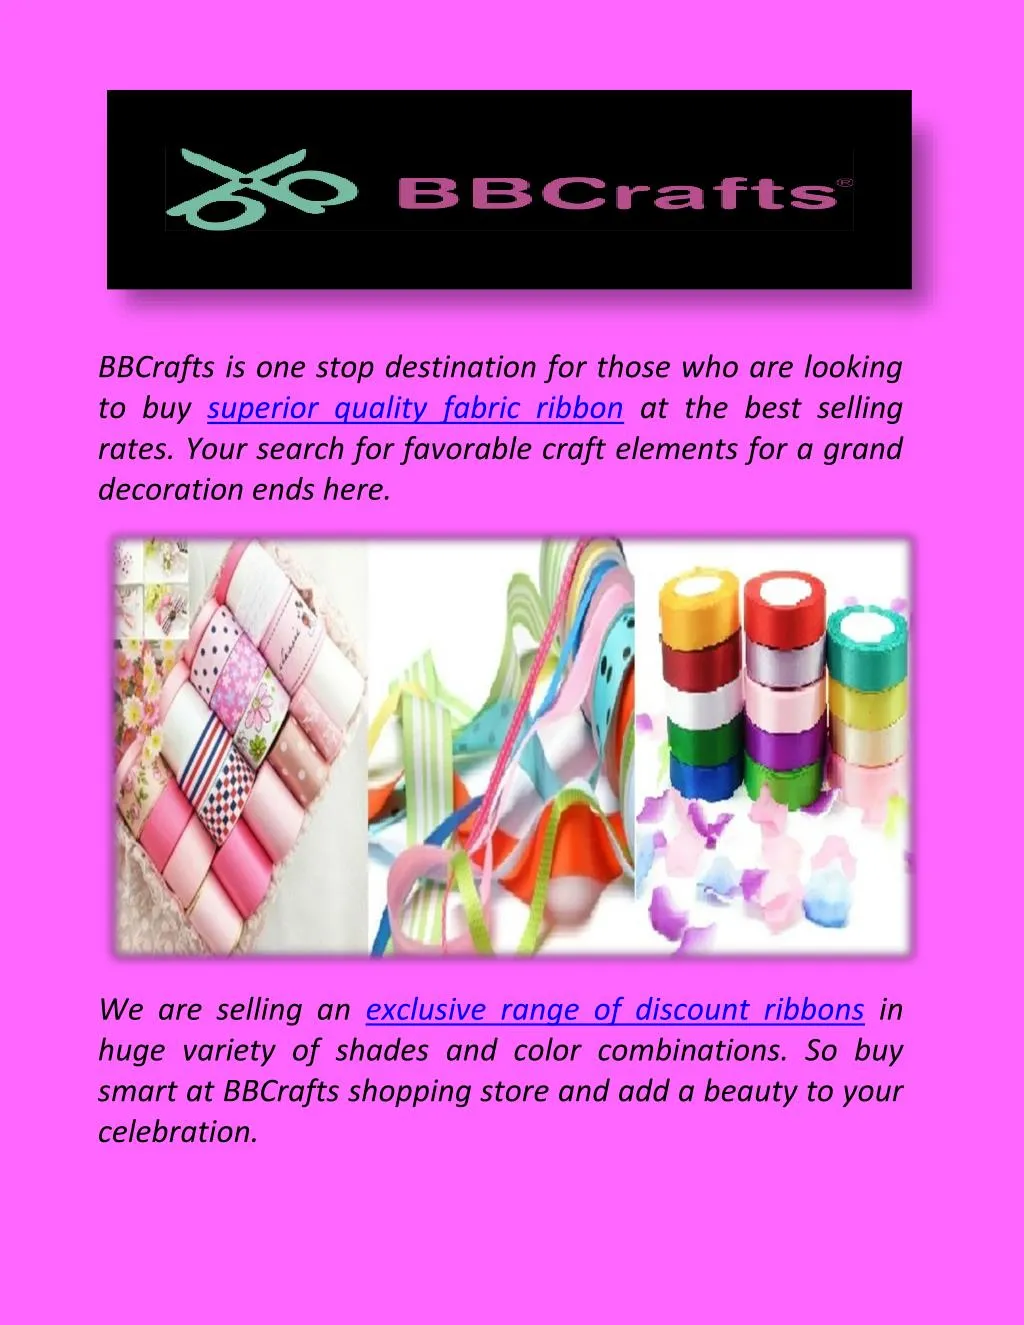 bbcrafts is one stop destination for those